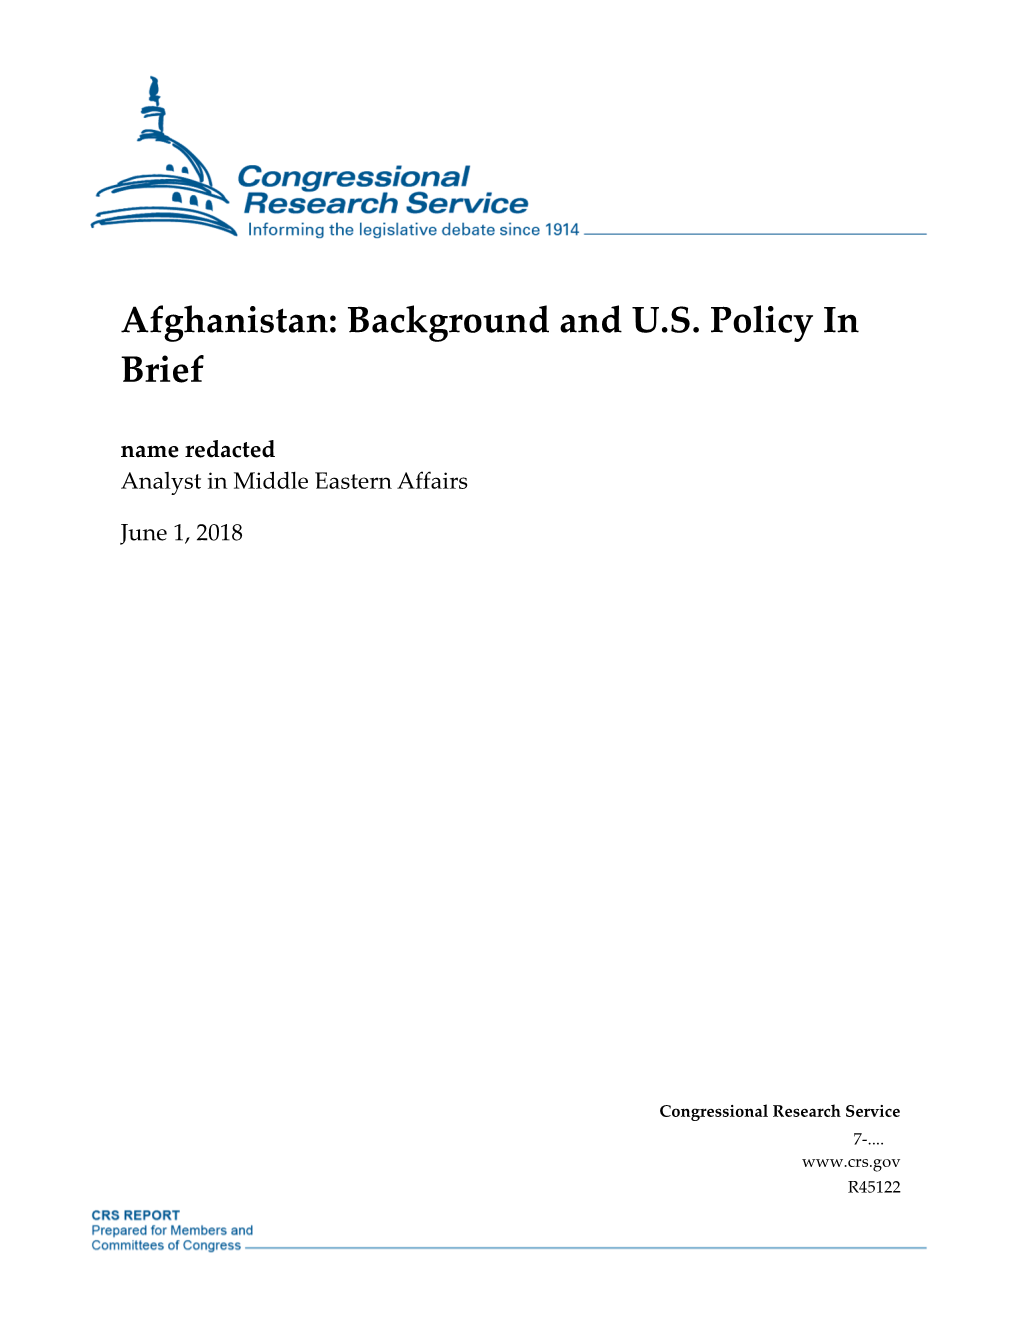 Afghanistan: Background and U.S. Policy in Brief Name Redacted Analyst in Middle Eastern Affairs